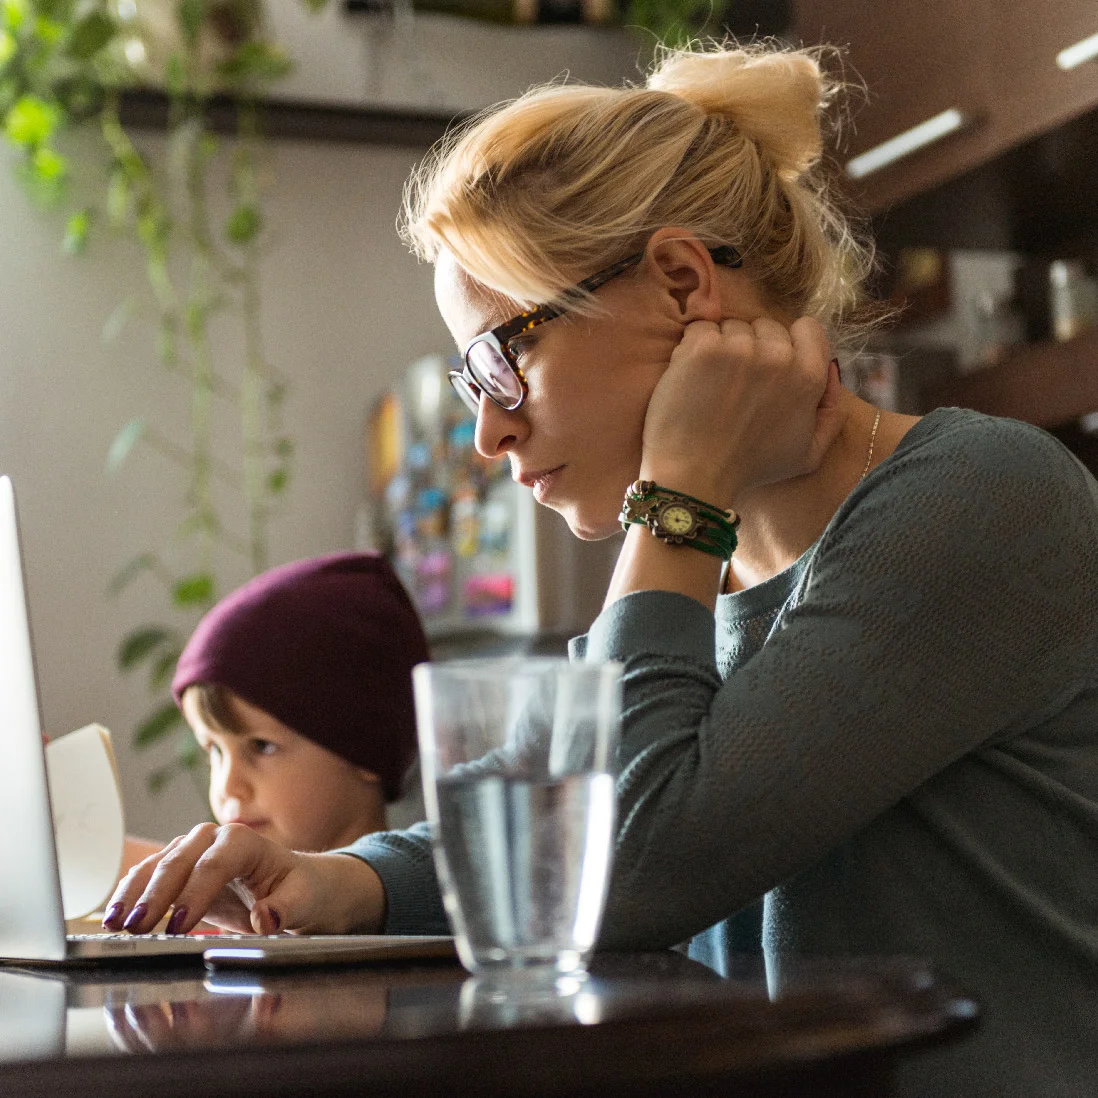 A woman with glasses and a bun, wearing a green sweater, uses a laptop intently to work on website design while a young child in a maroon beanie looks on, both seated at a